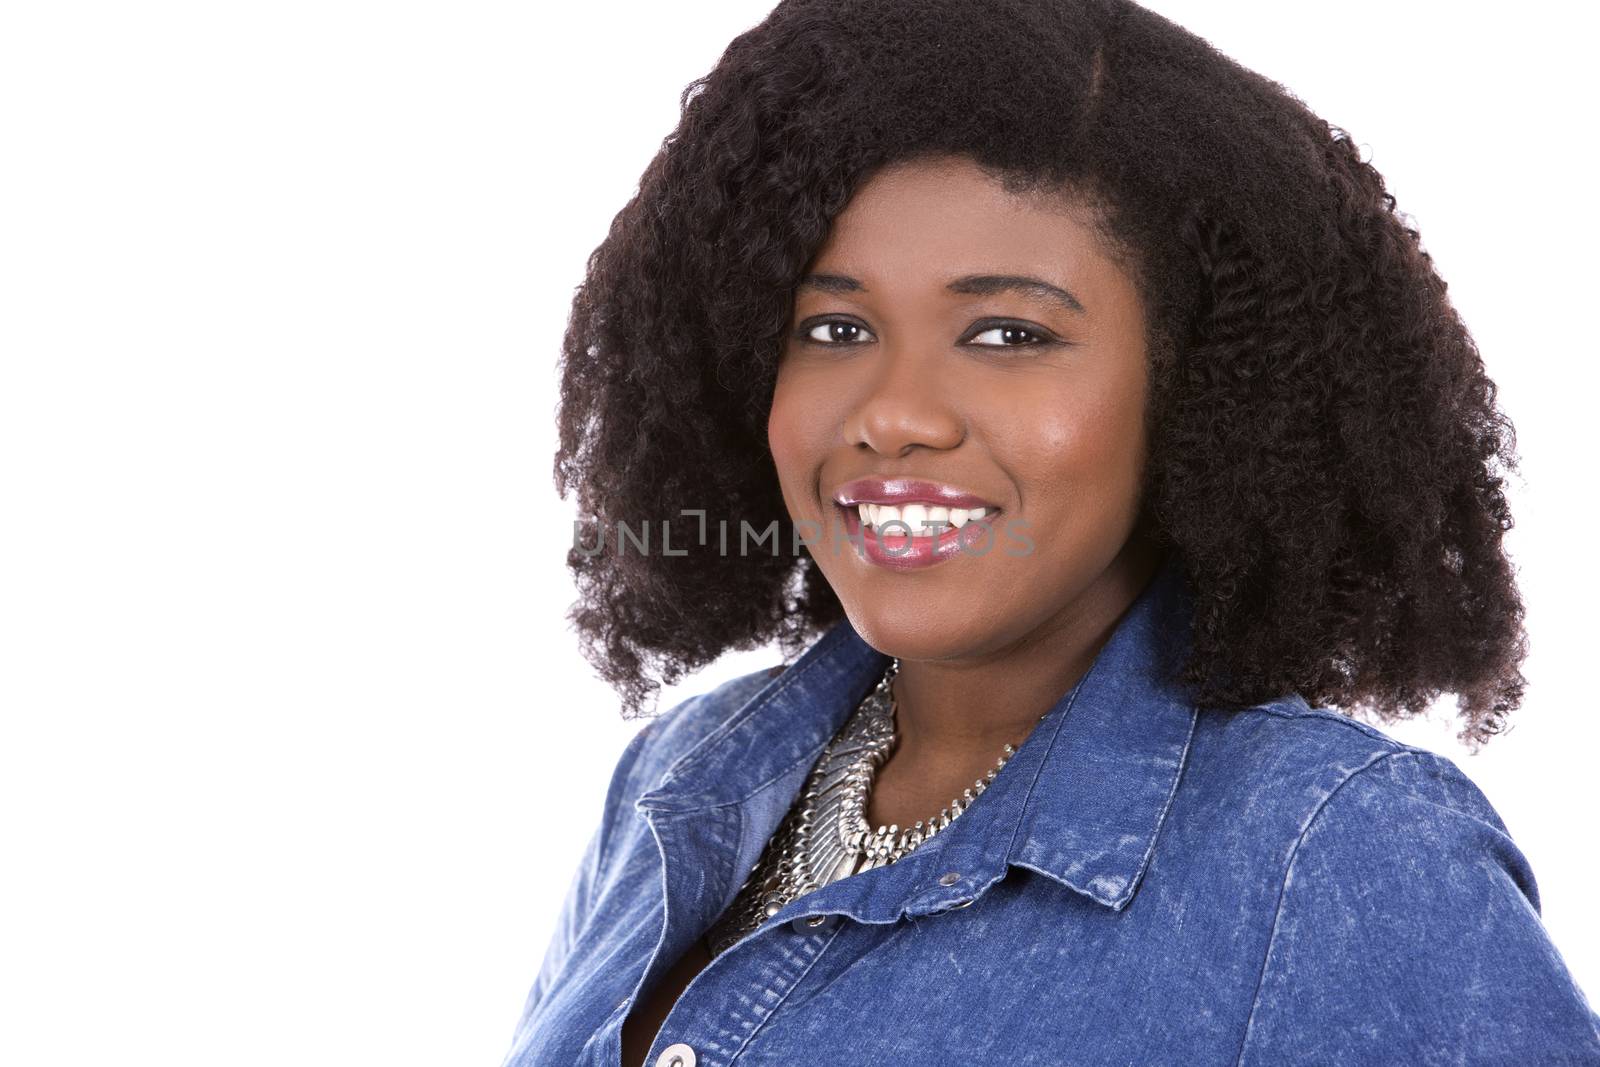 beautiful young black woman is wearing jean dress on white background